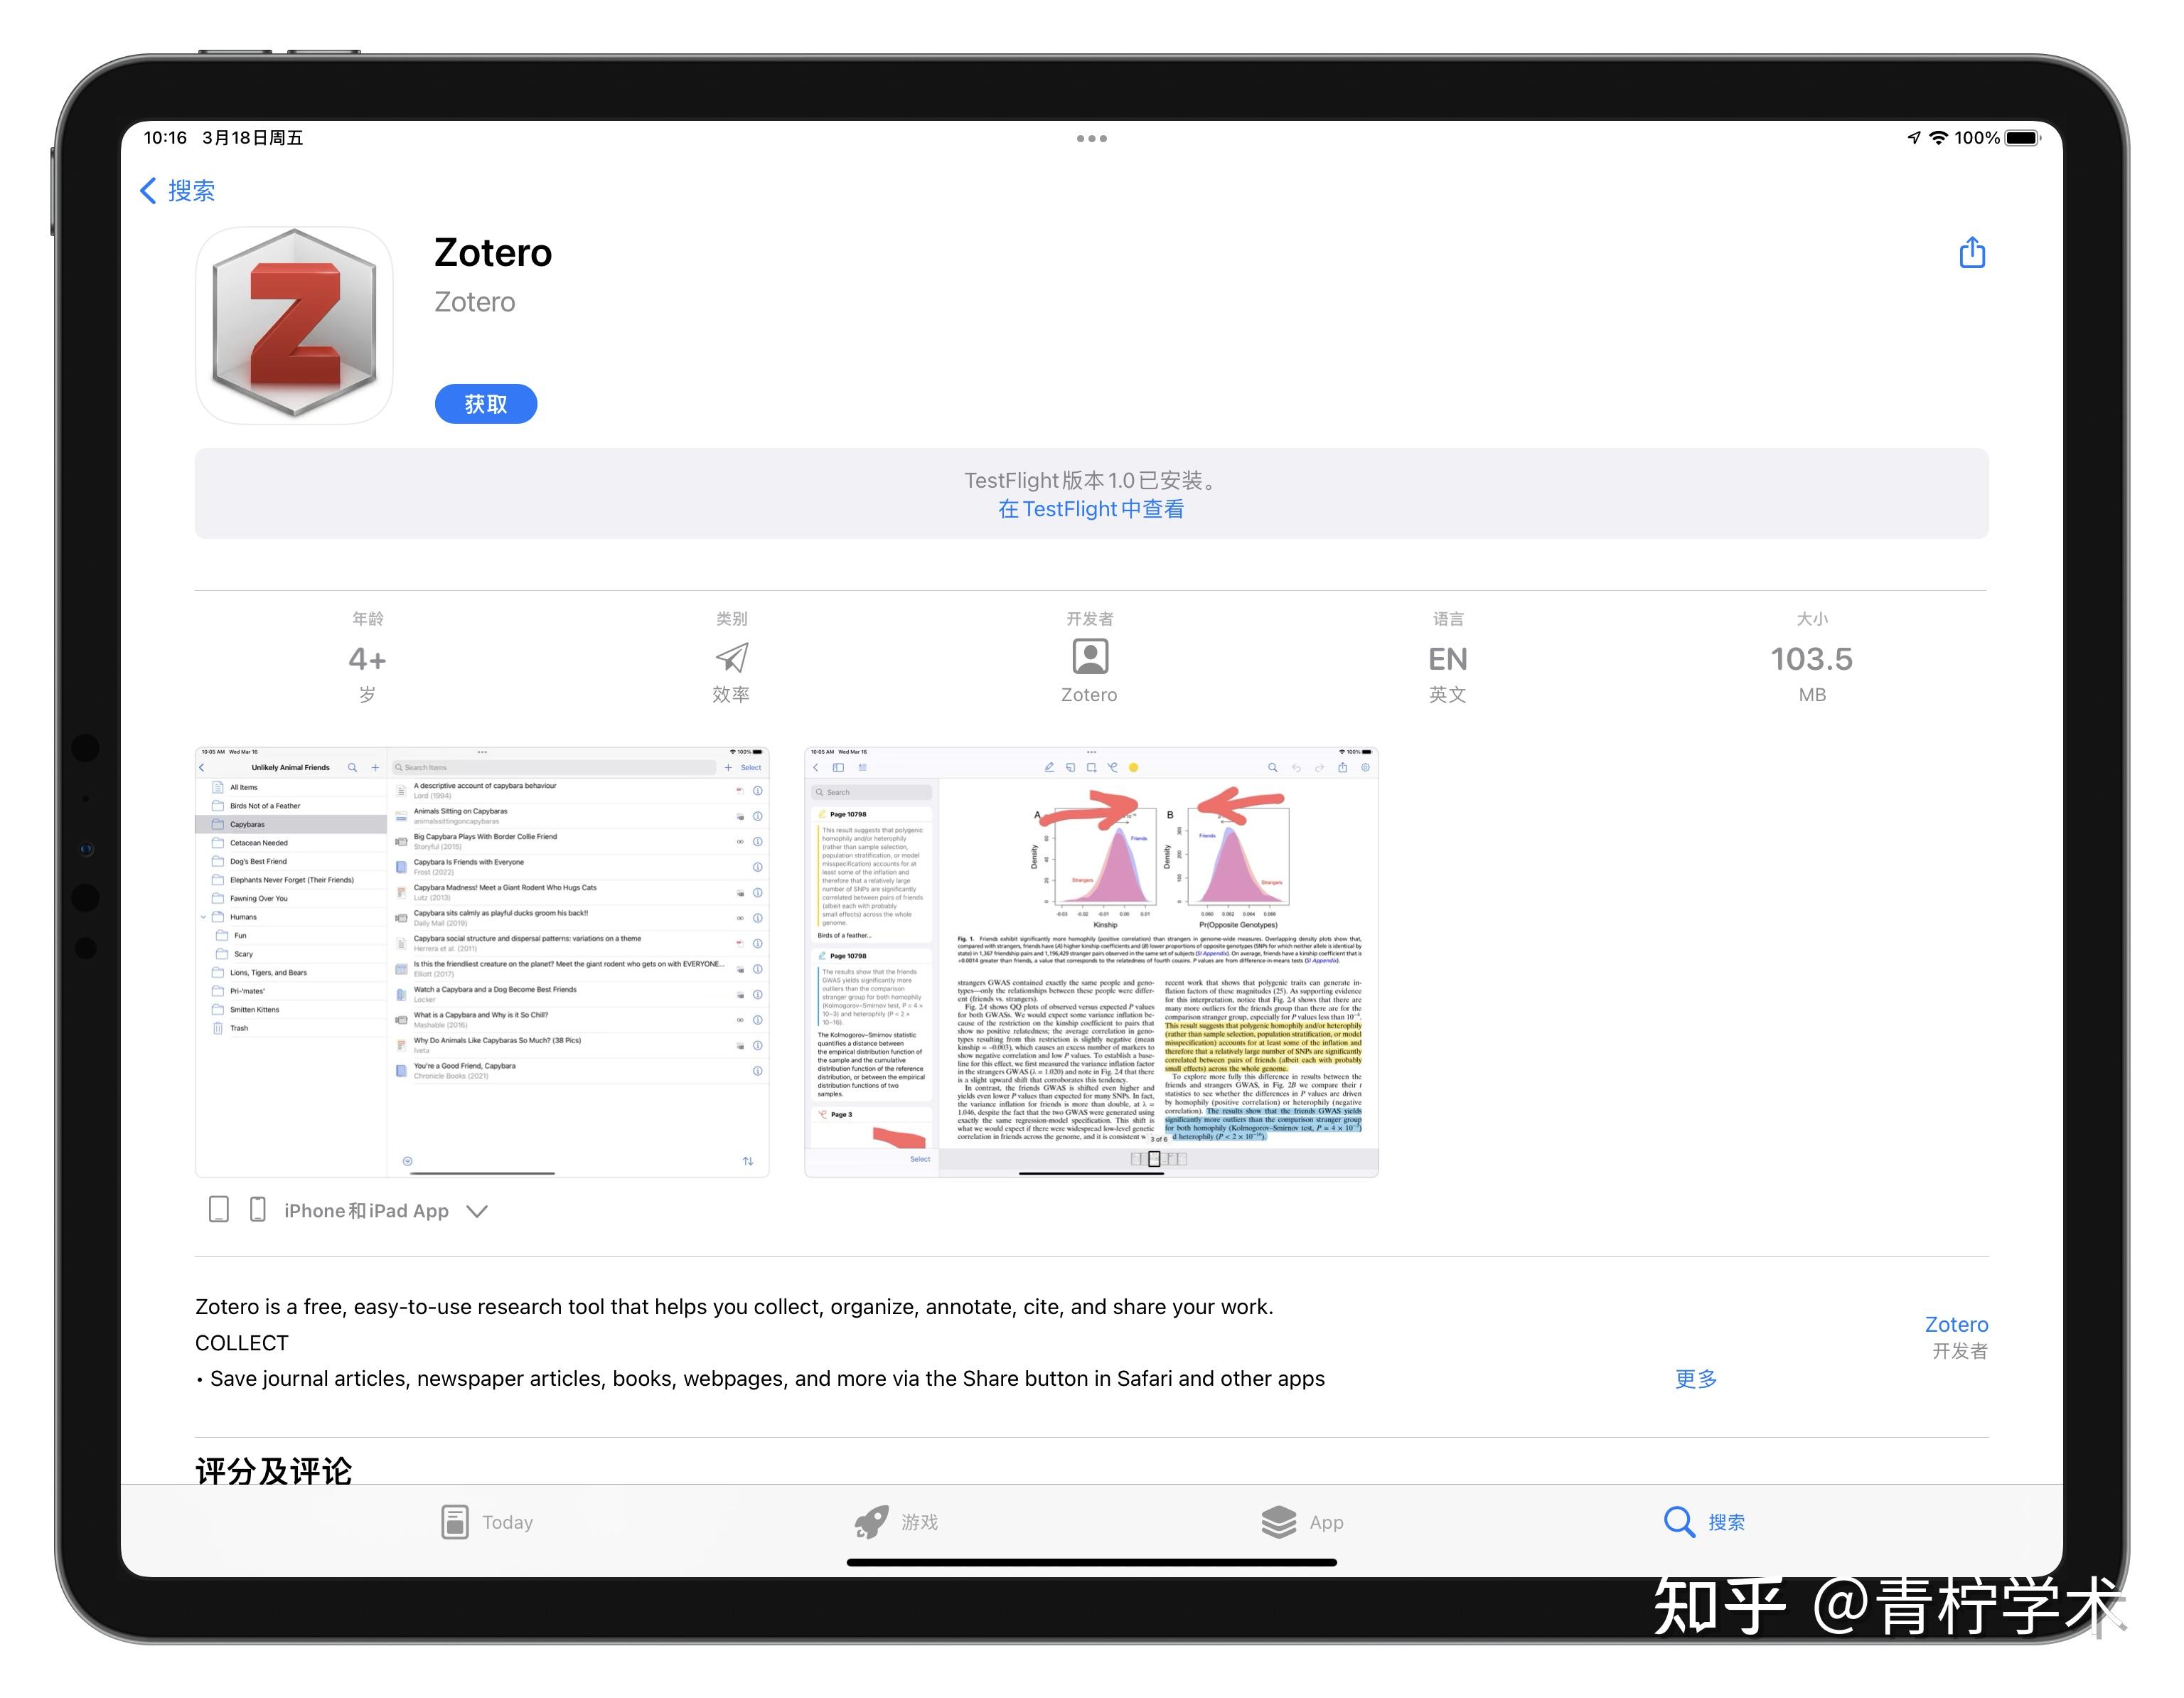 free for apple download Zotero 6.0.27